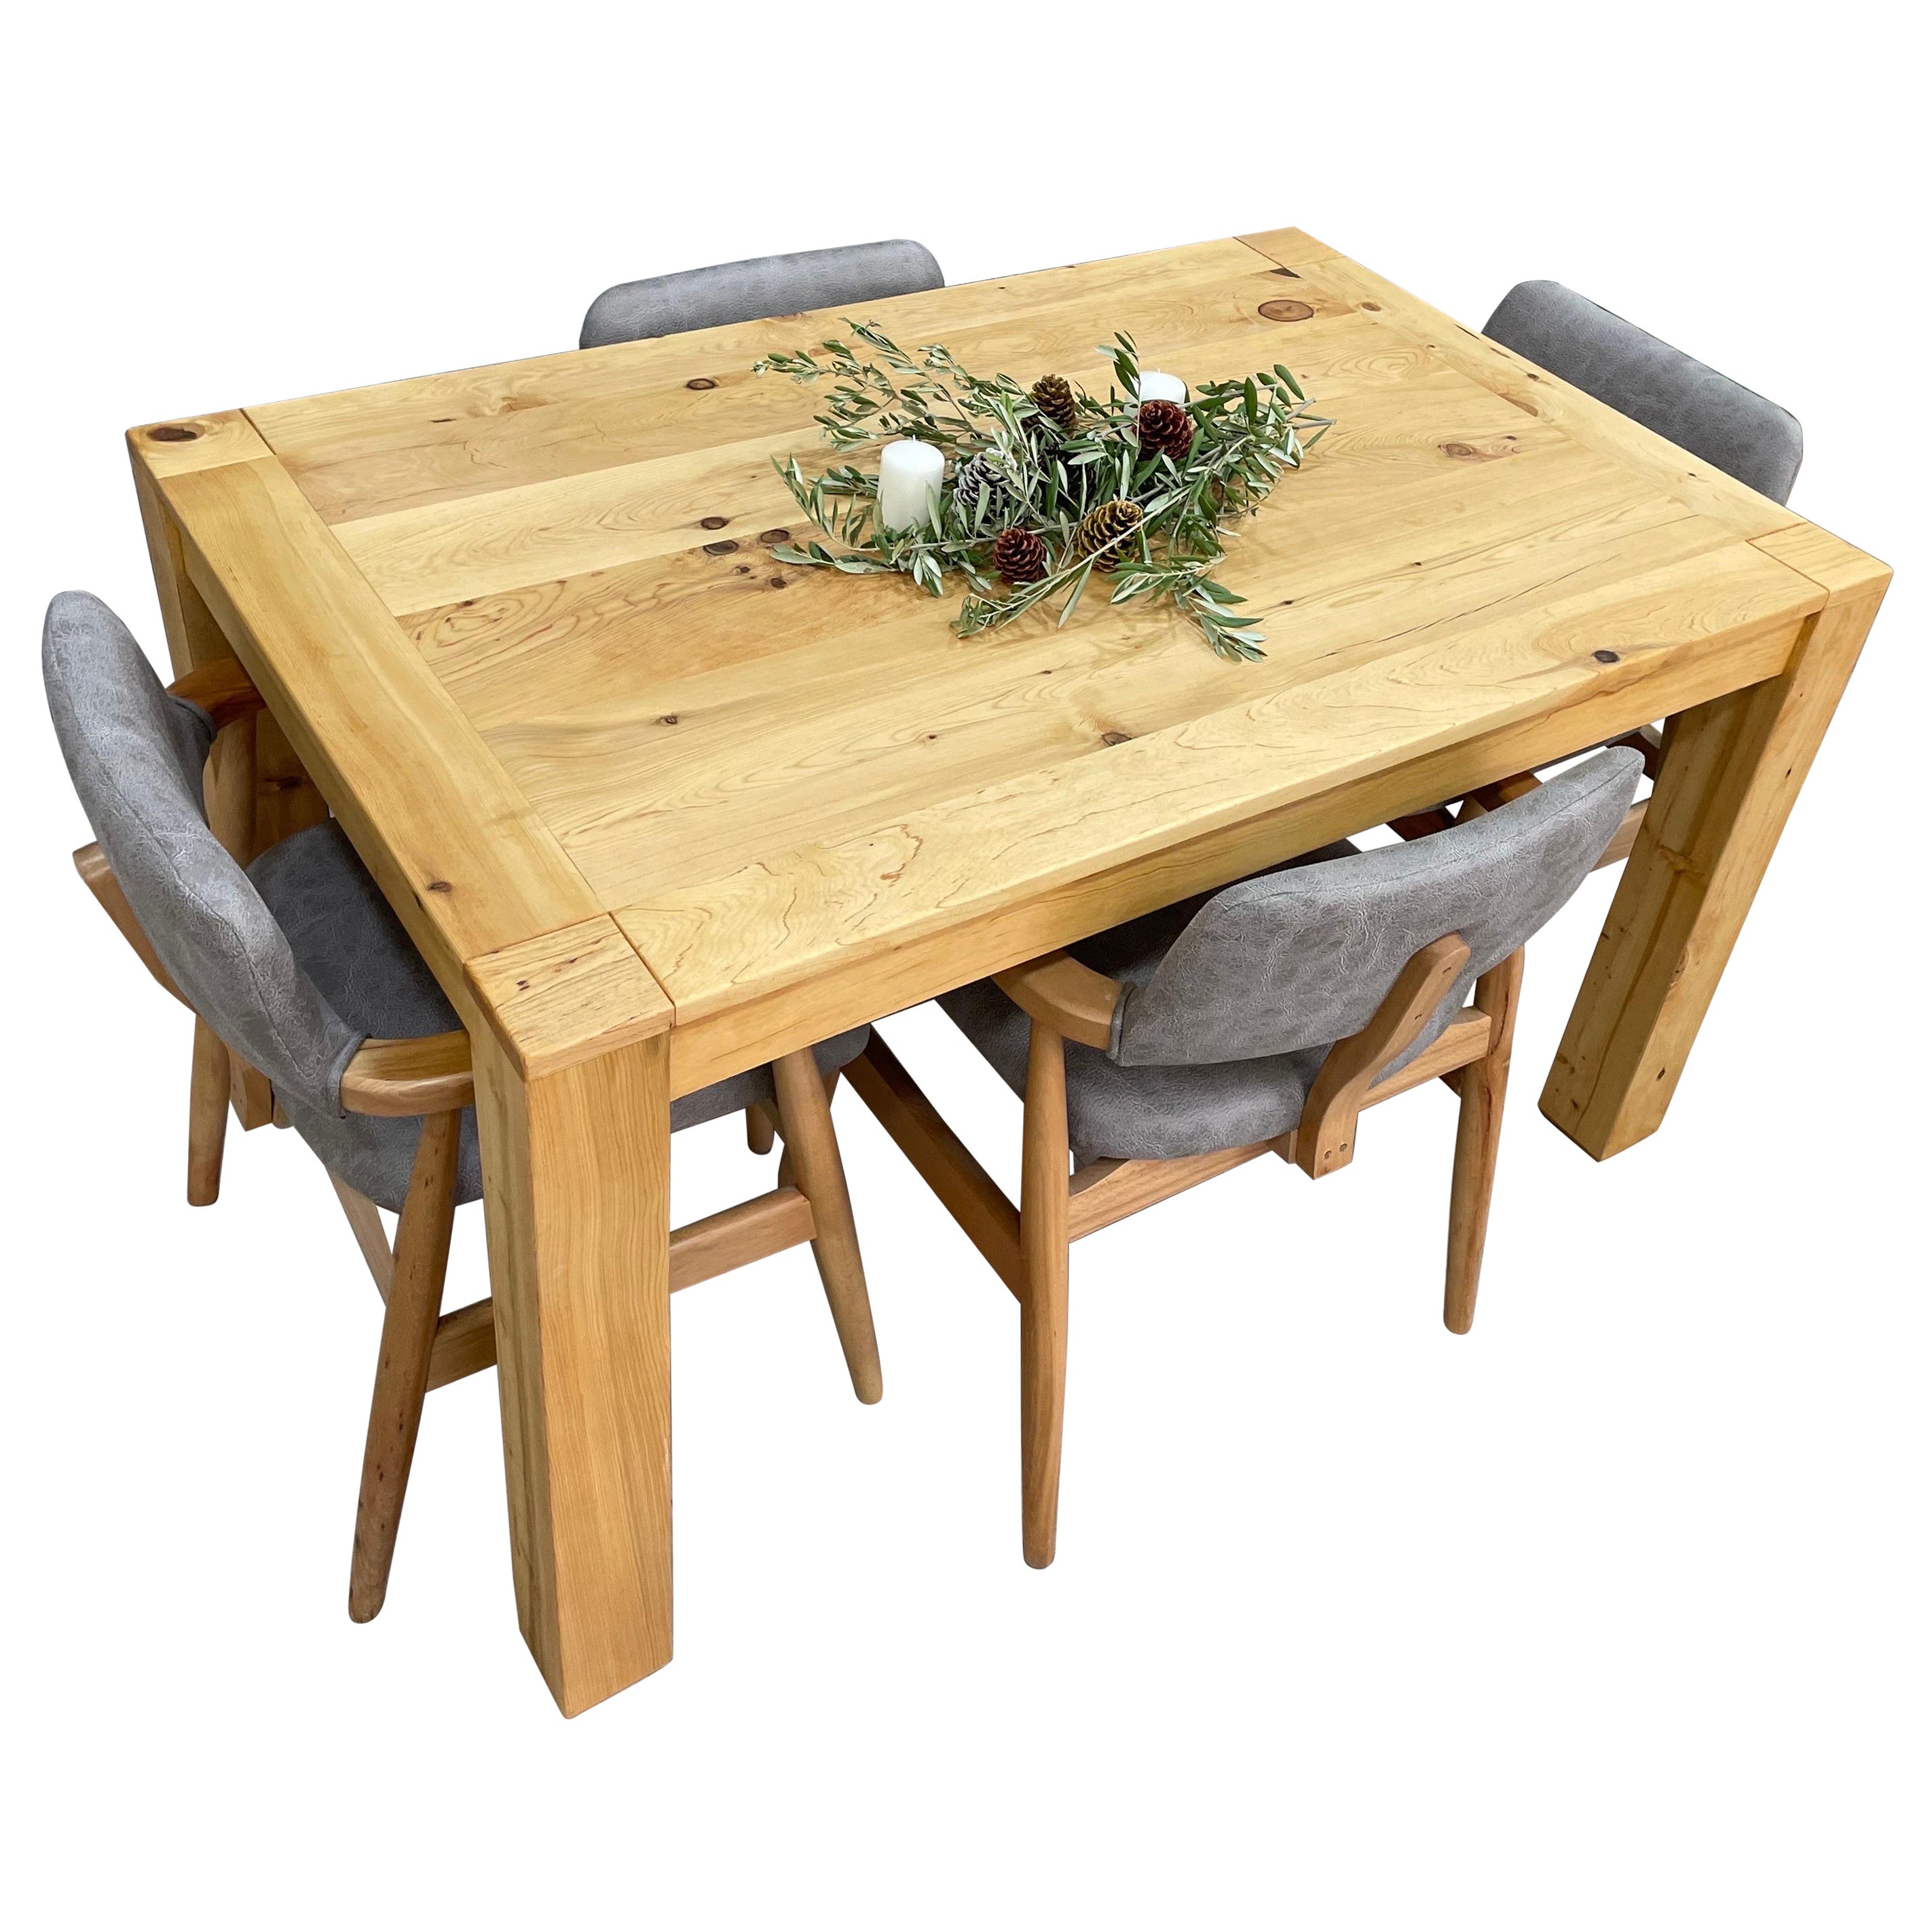 Scandinavian Modern Style Dining Table in Solid Cedar Wood, Made to Order For Sale